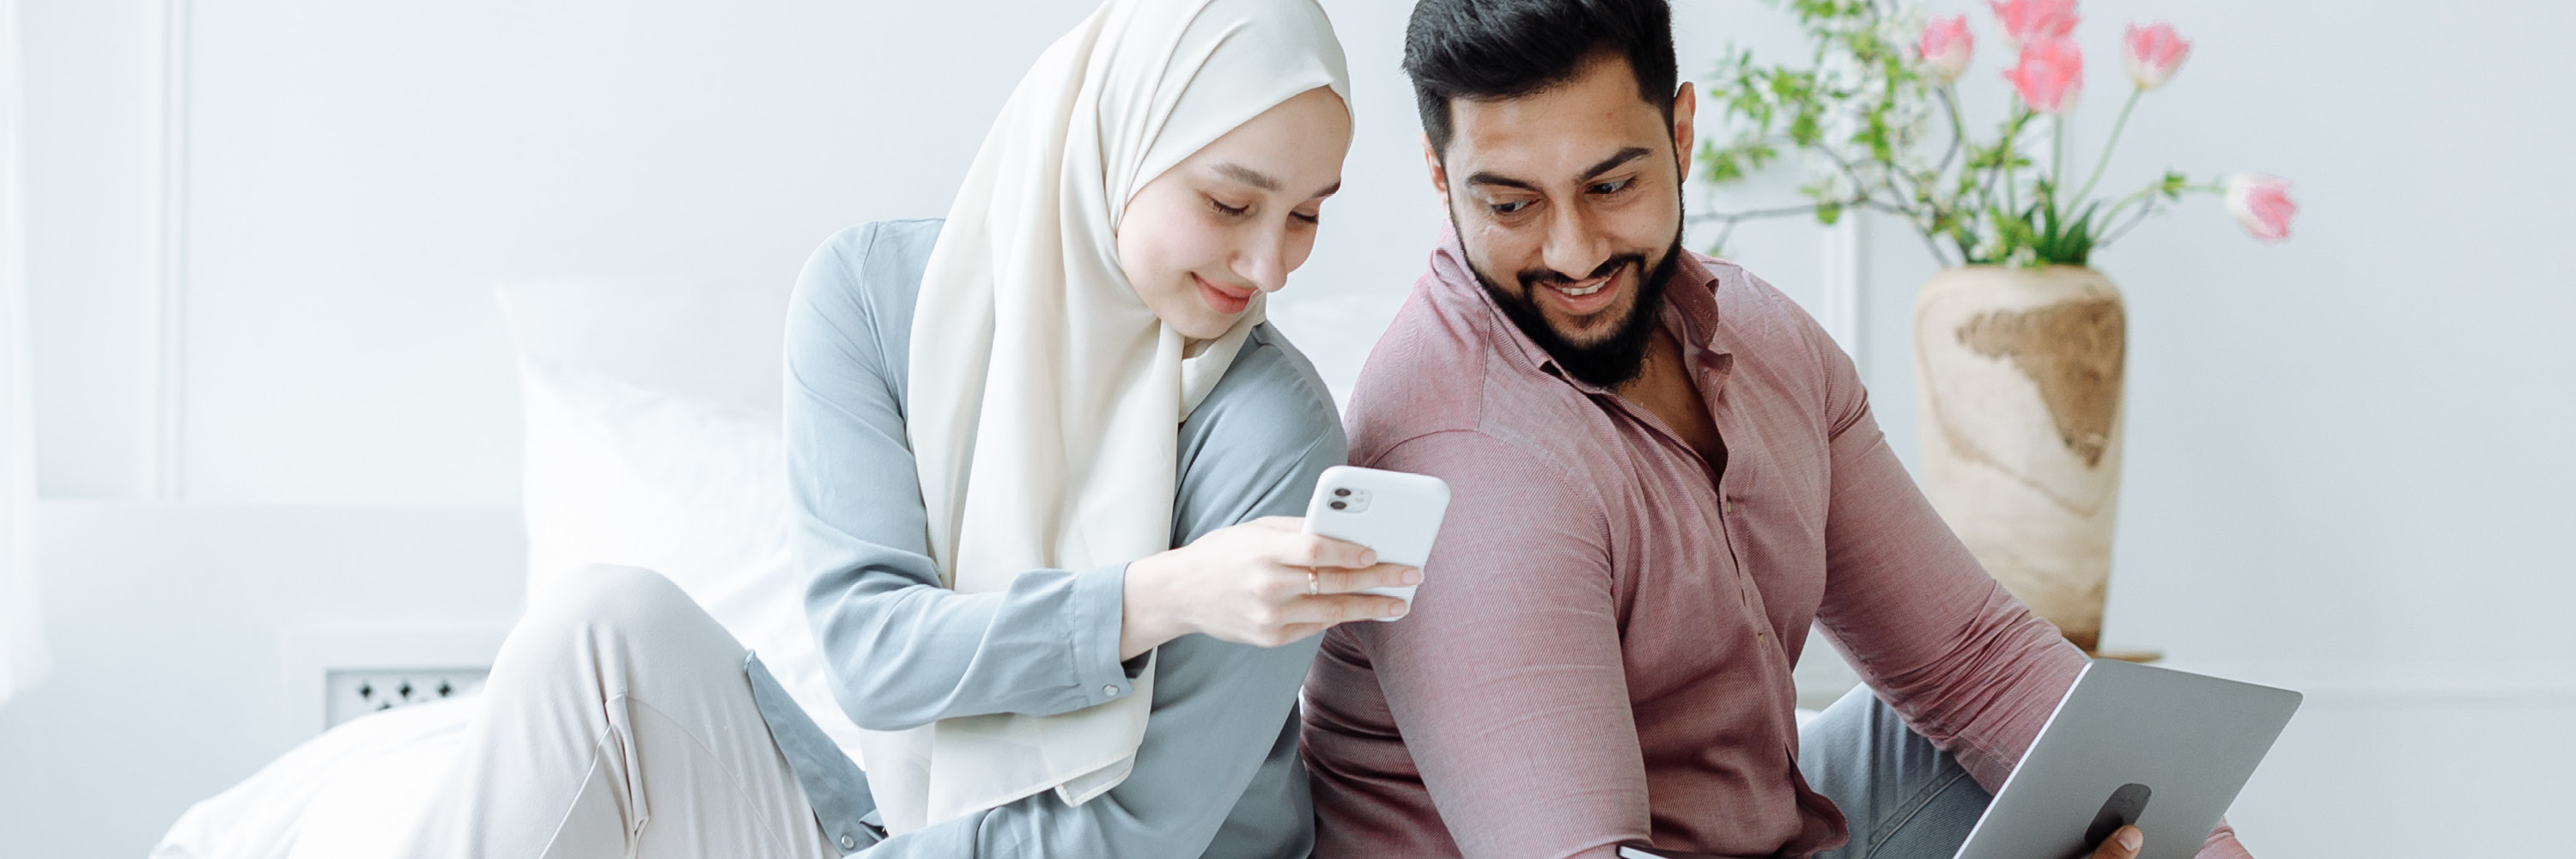 Couple looking at mobile phone together and smiling